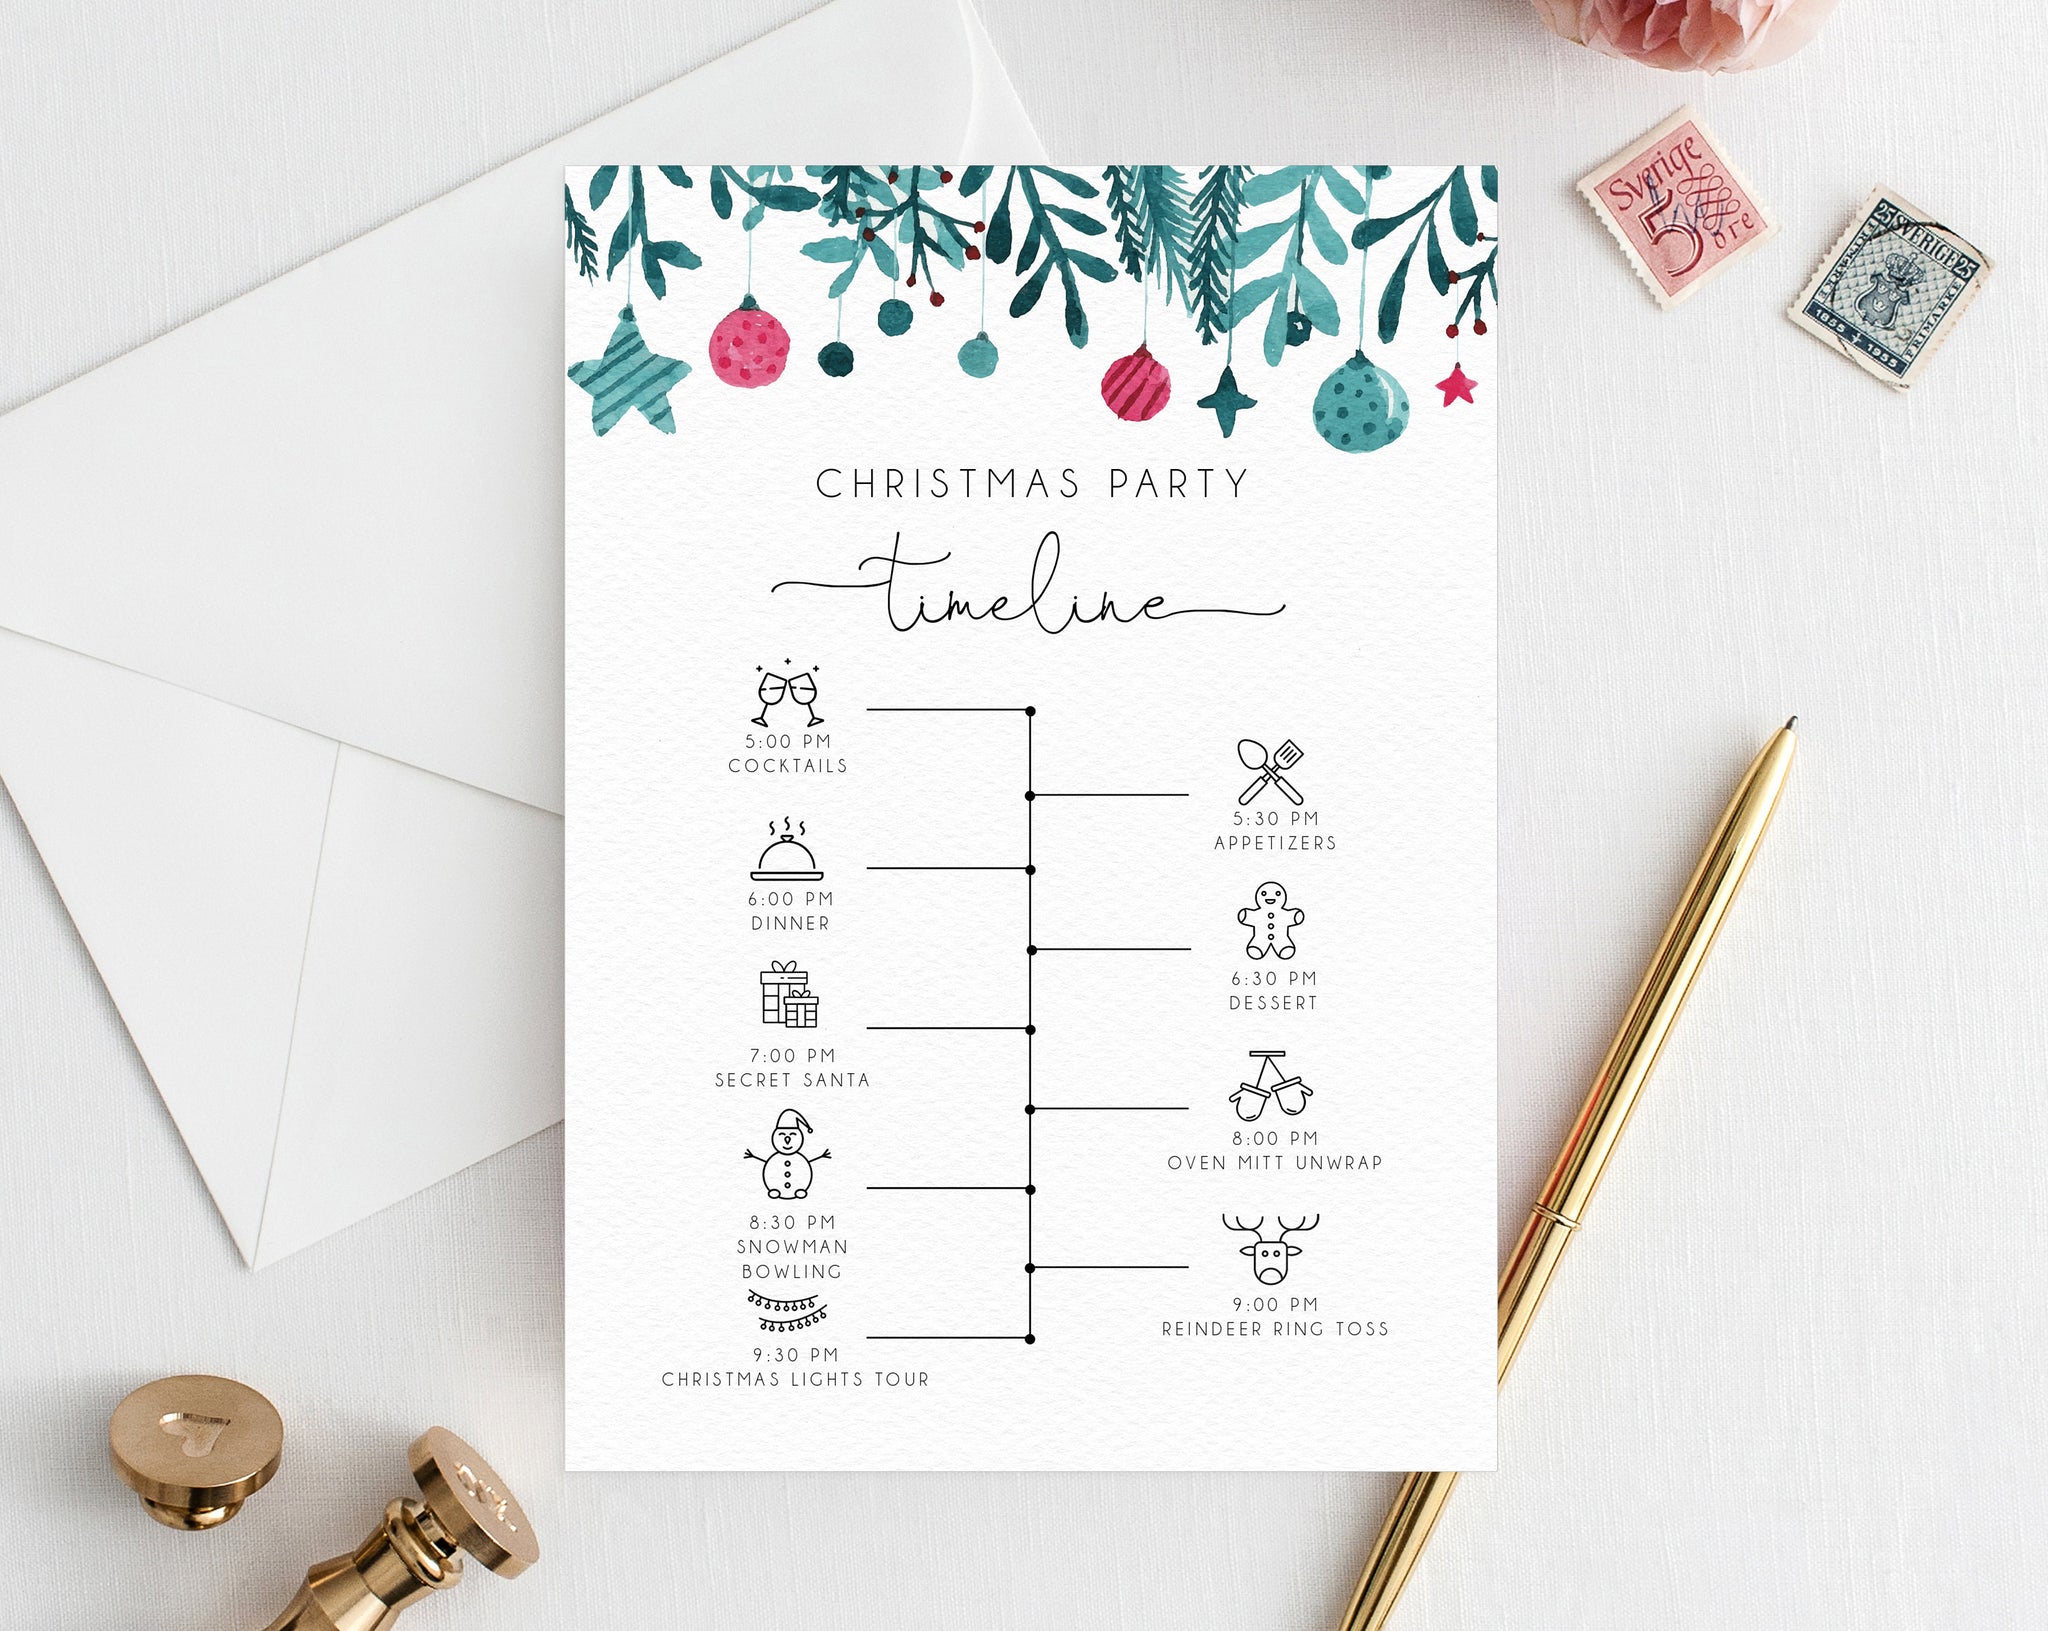 Christmas Party Itinerary Template, Christmas Party Timeline, Holidays